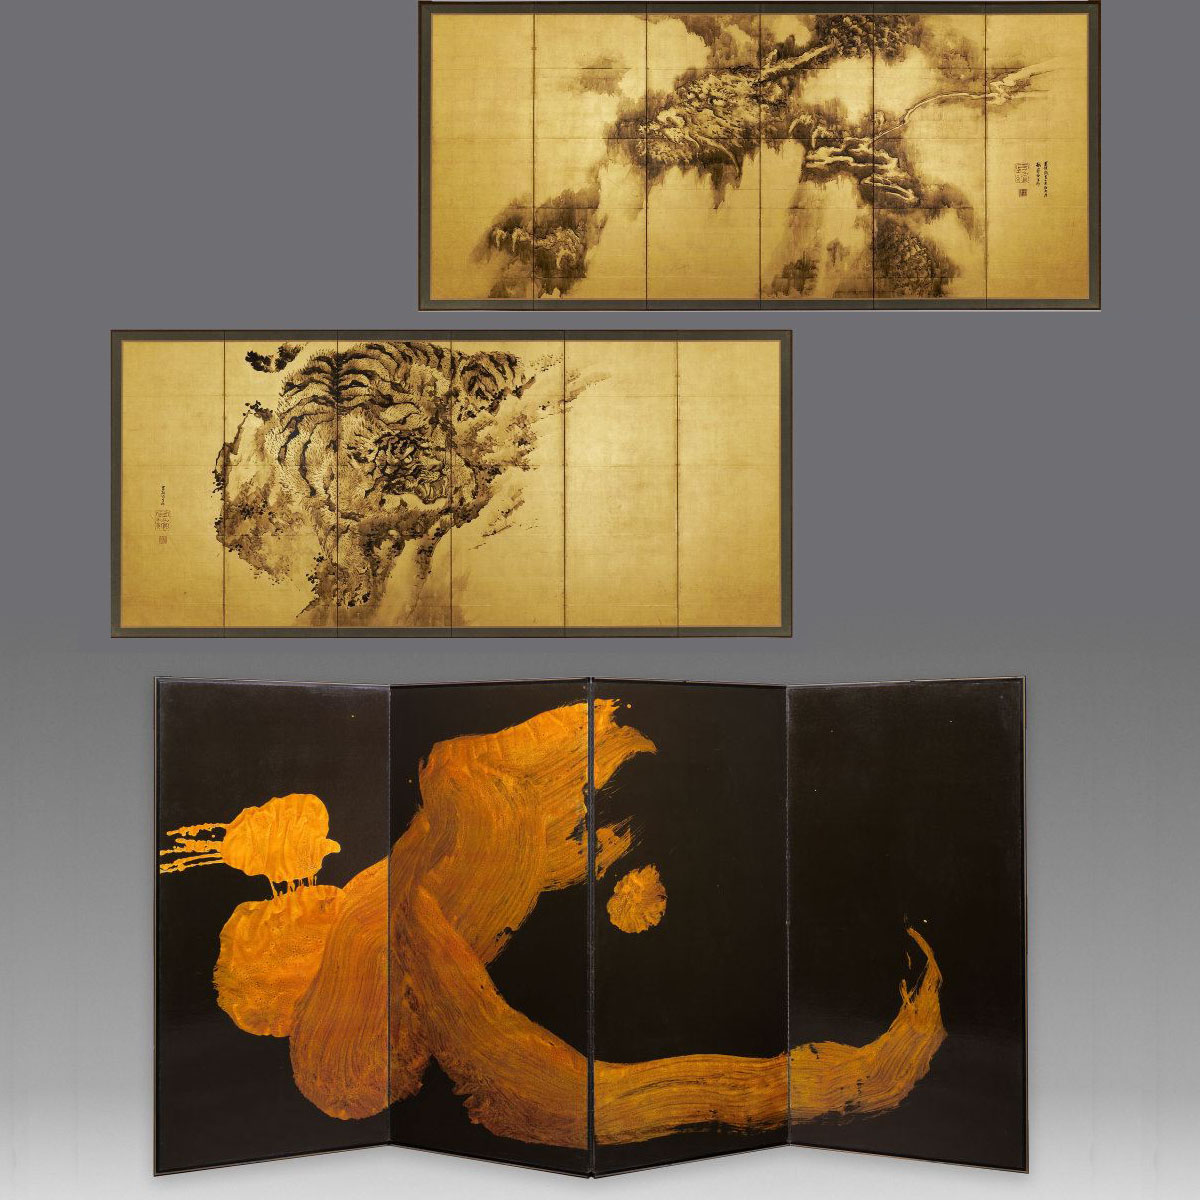 Pair of Japanese folding screens showing a dragon and tiger in black ink on gold plus a single screen with a stylized calligraphic dragon